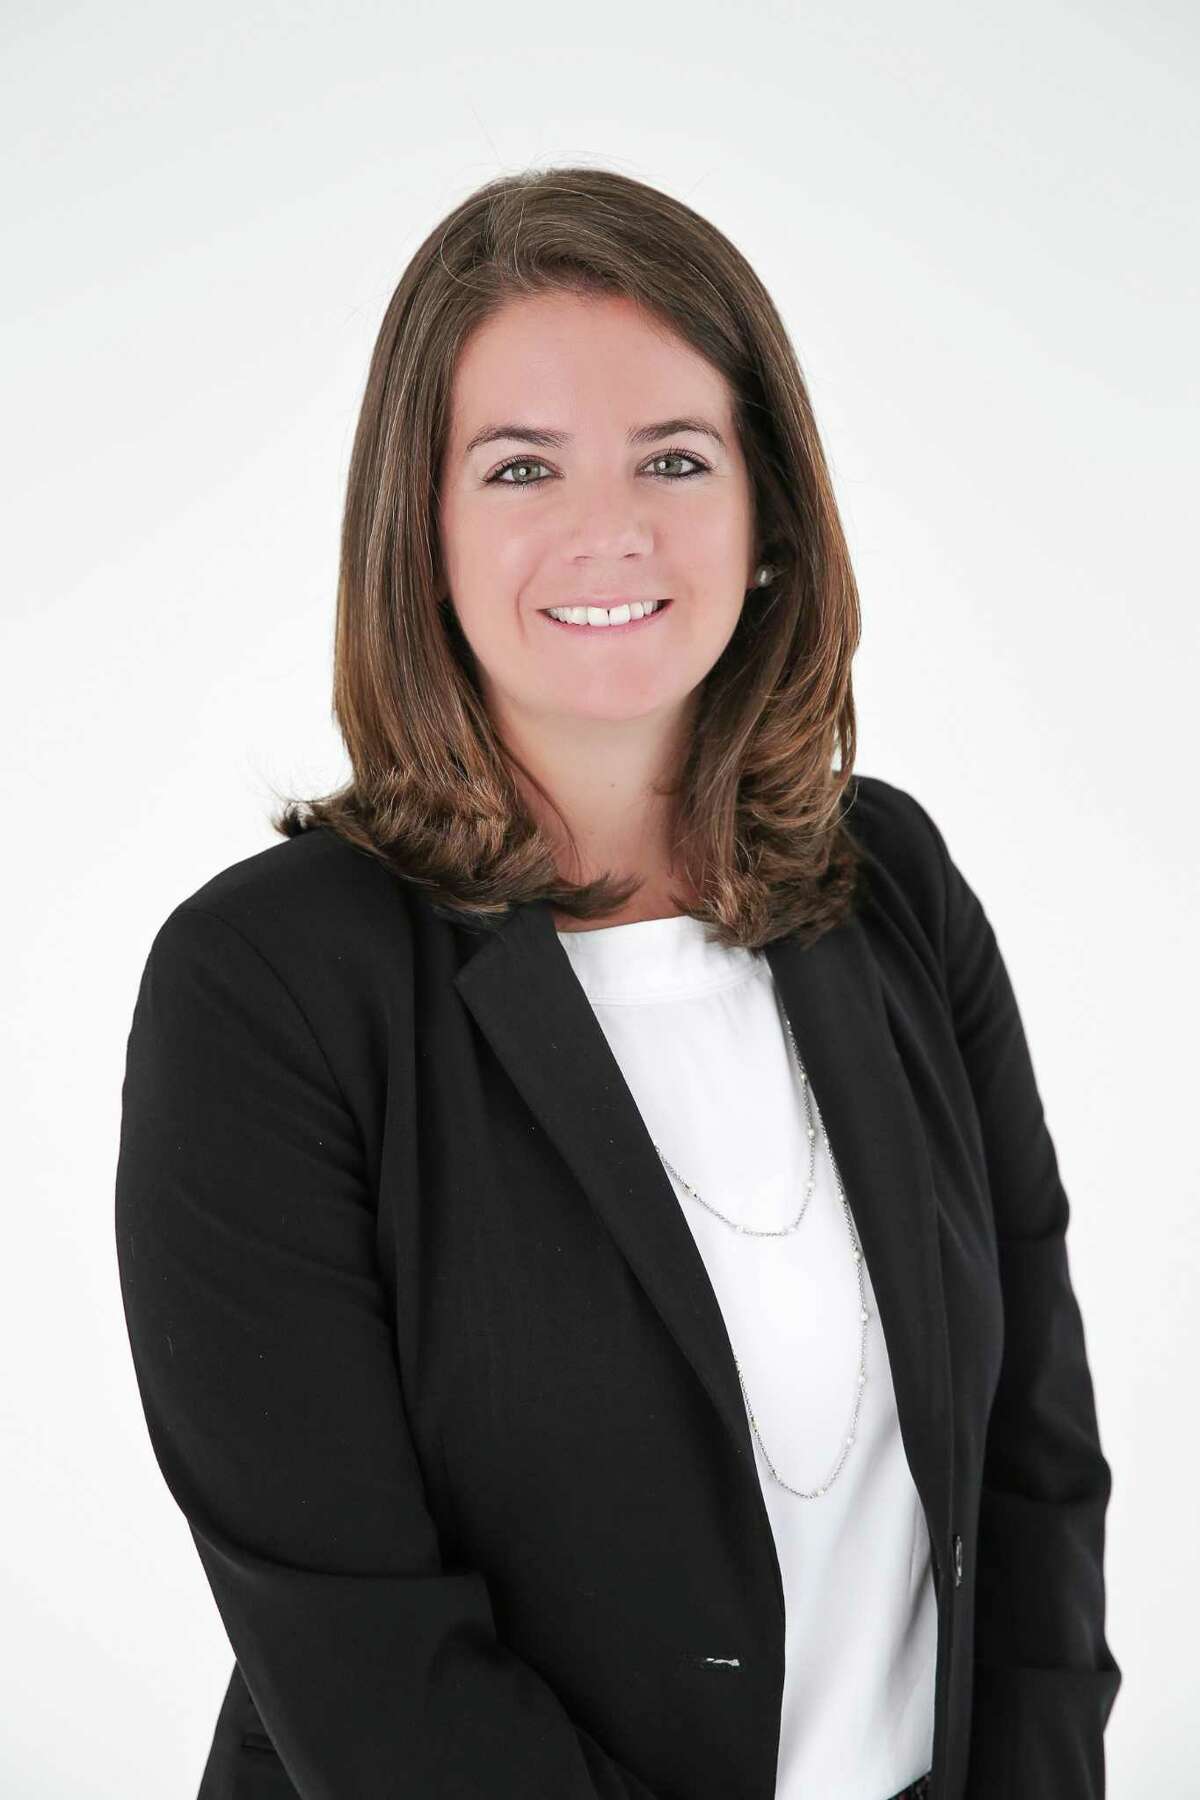 Sasha Houlihan, a Greenwich native with corporate experience at General Electric Corporate, replaced Kim Eves, who now leads communications for Greenwich Country Day School after 20 years with Greenwich Public Schools. Houlihan has now left the district.